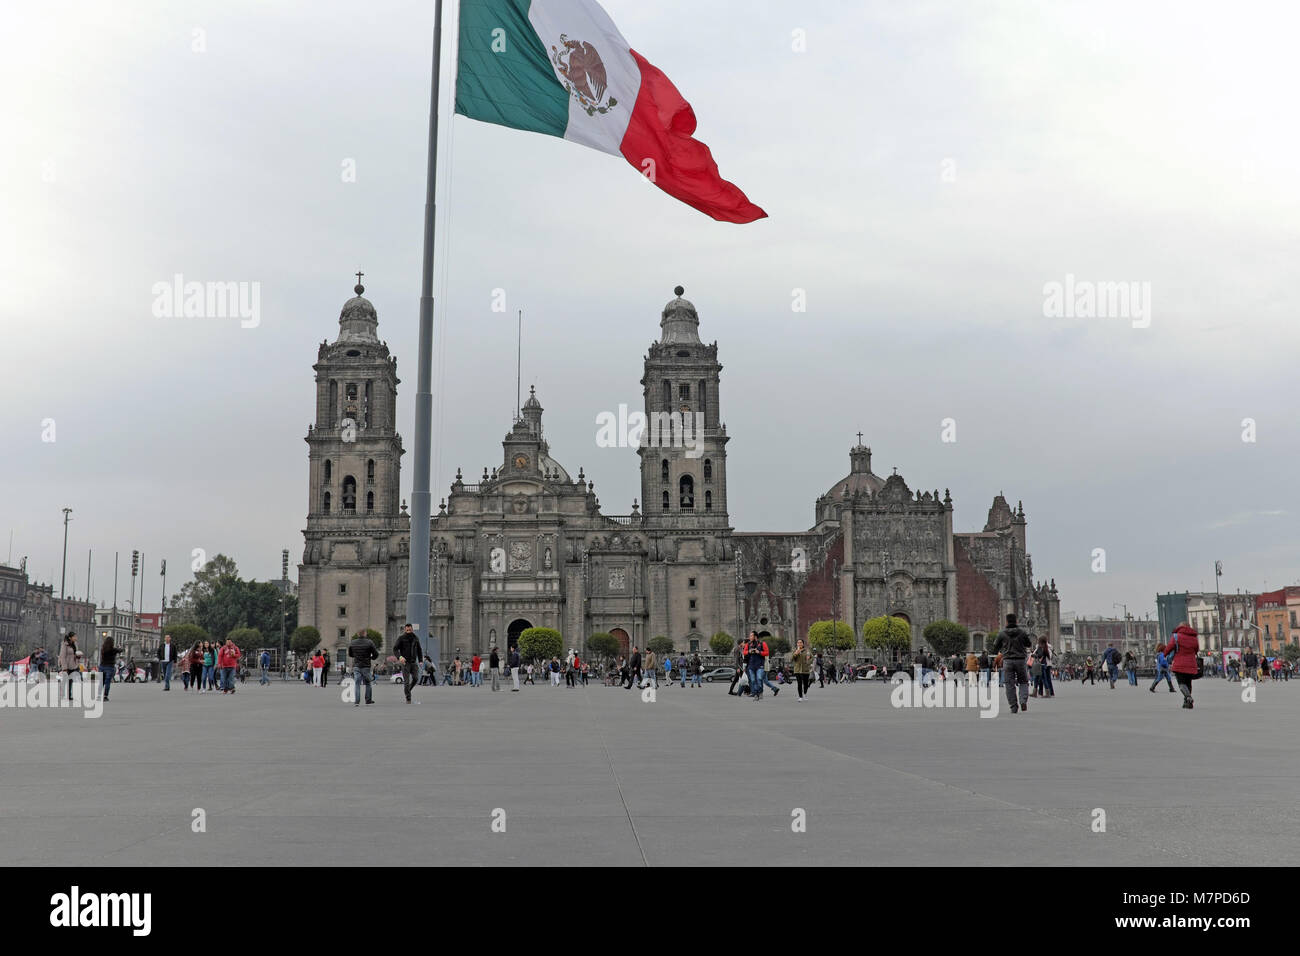 The vast zocalo square in Mexico City holds architectural treasures including the Mexico City Metropolitan Cathedral as shown in the background. Stock Photo